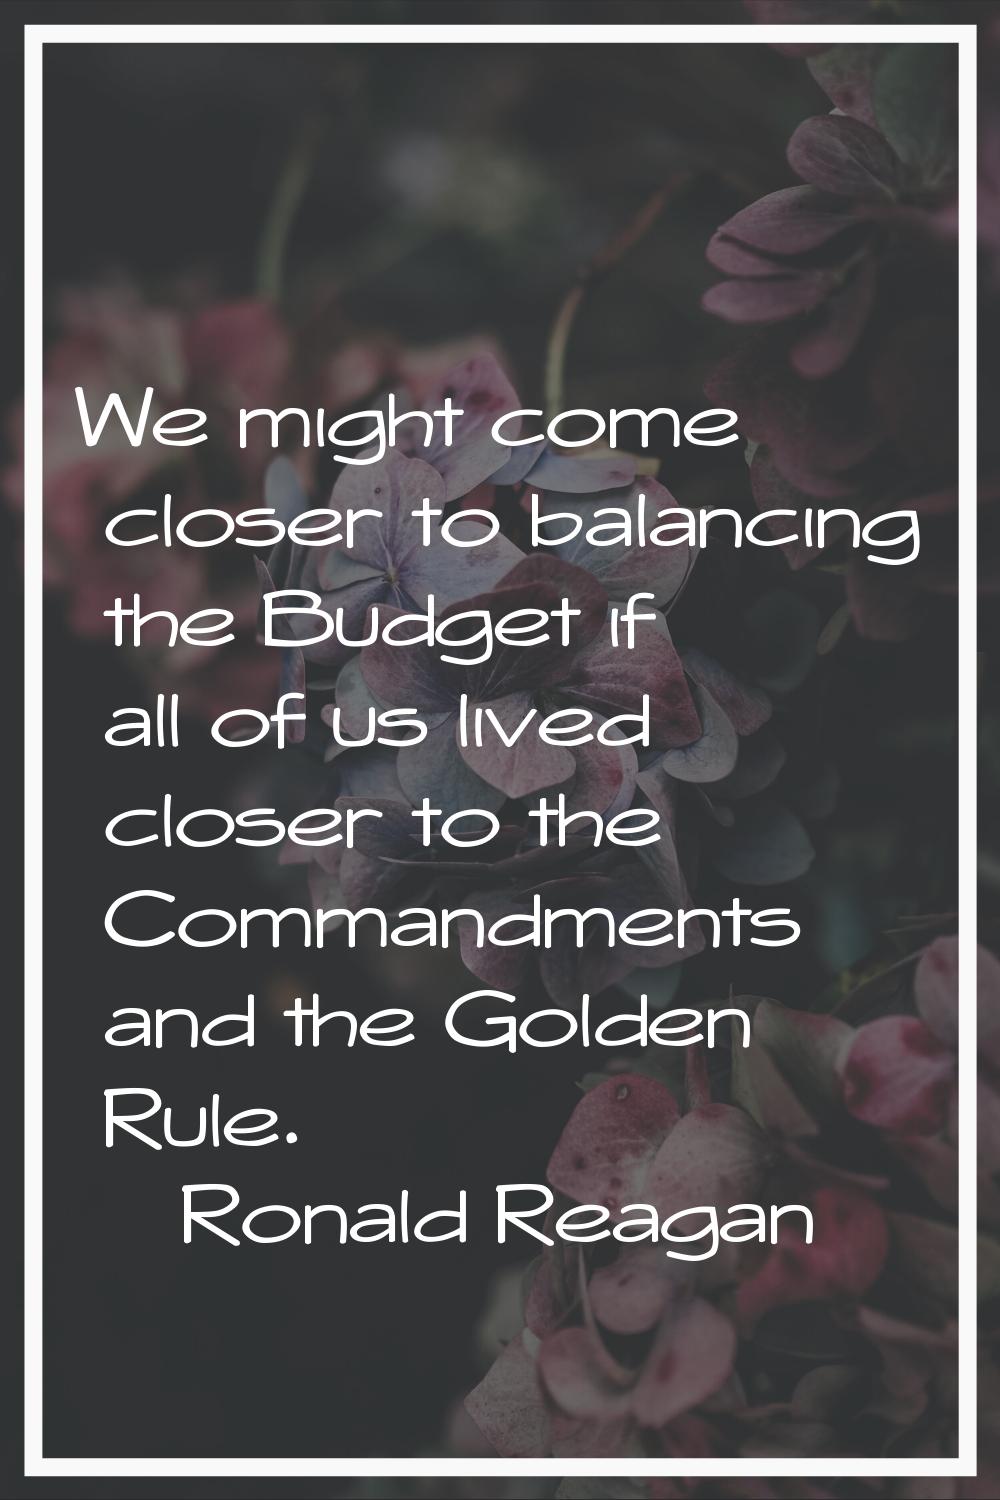 We might come closer to balancing the Budget if all of us lived closer to the Commandments and the 